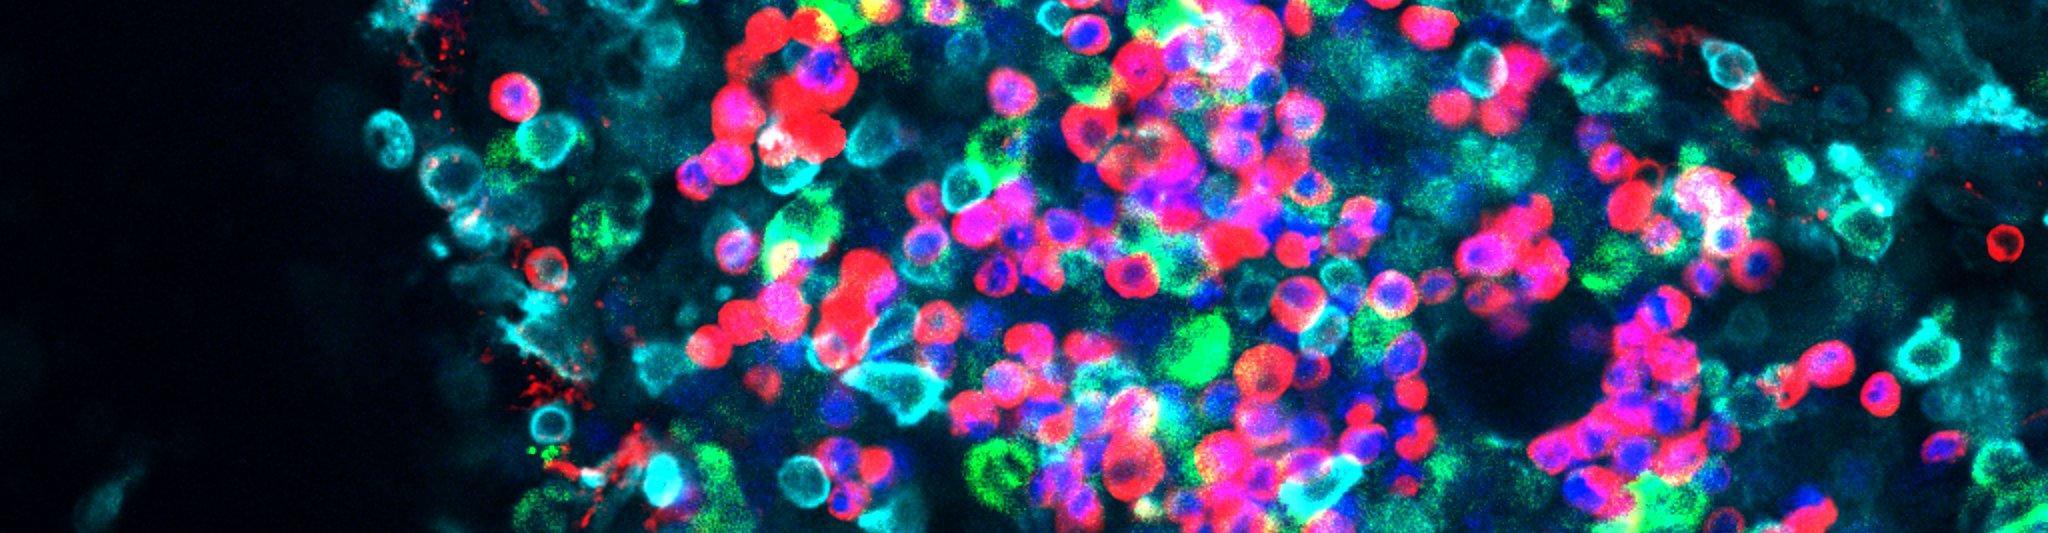 Immune cells within adipose tissue imaged using a confocal microscope